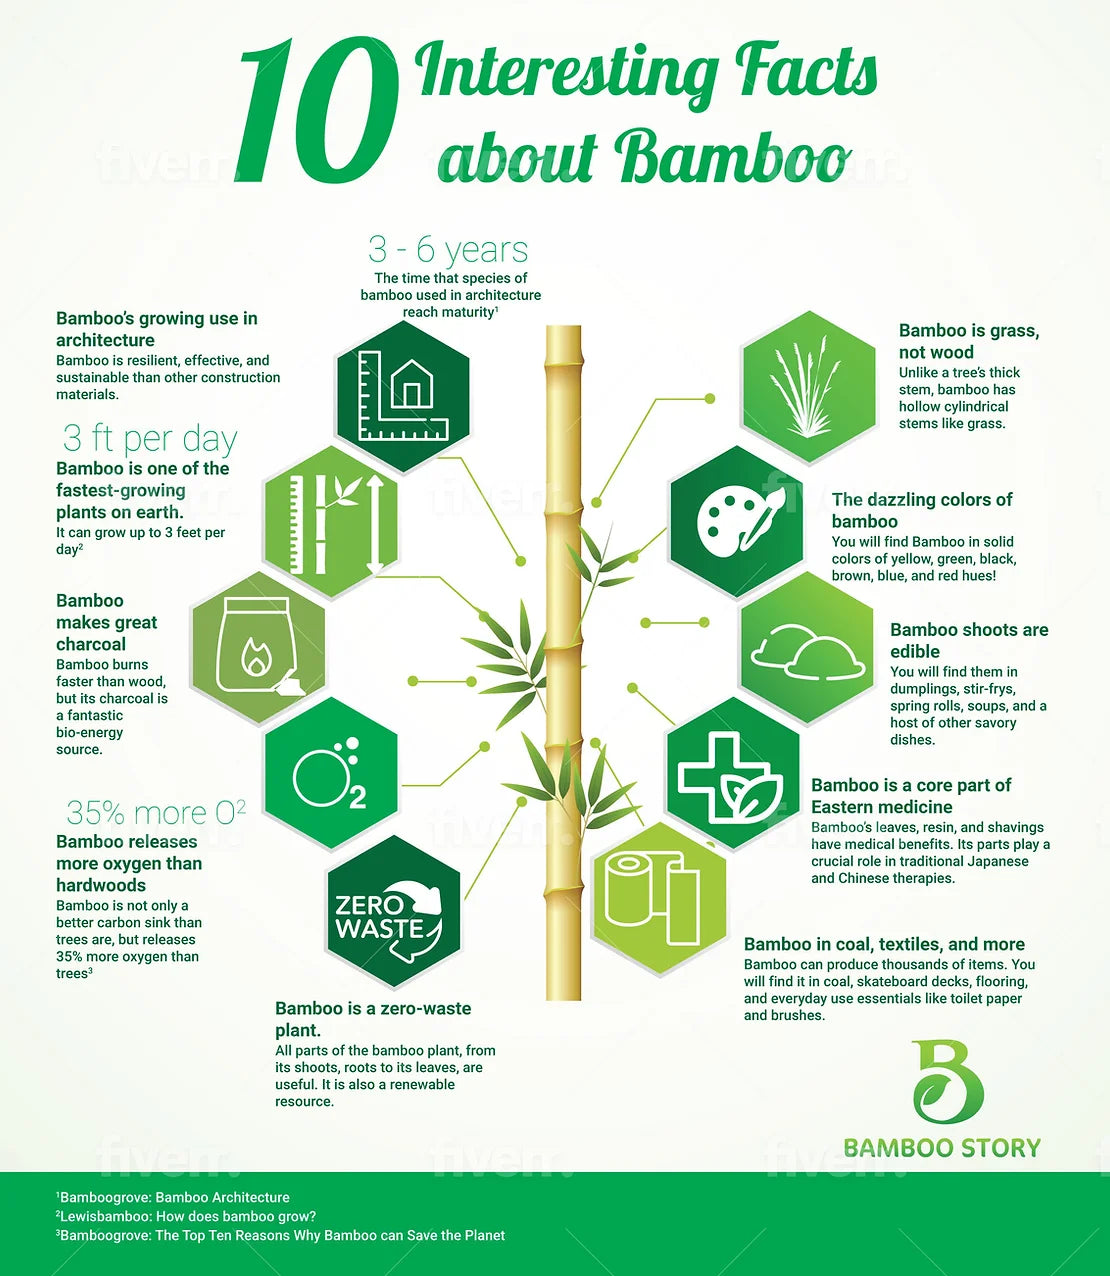 10 INTERESTING FACTS ABOUT BAMBOO